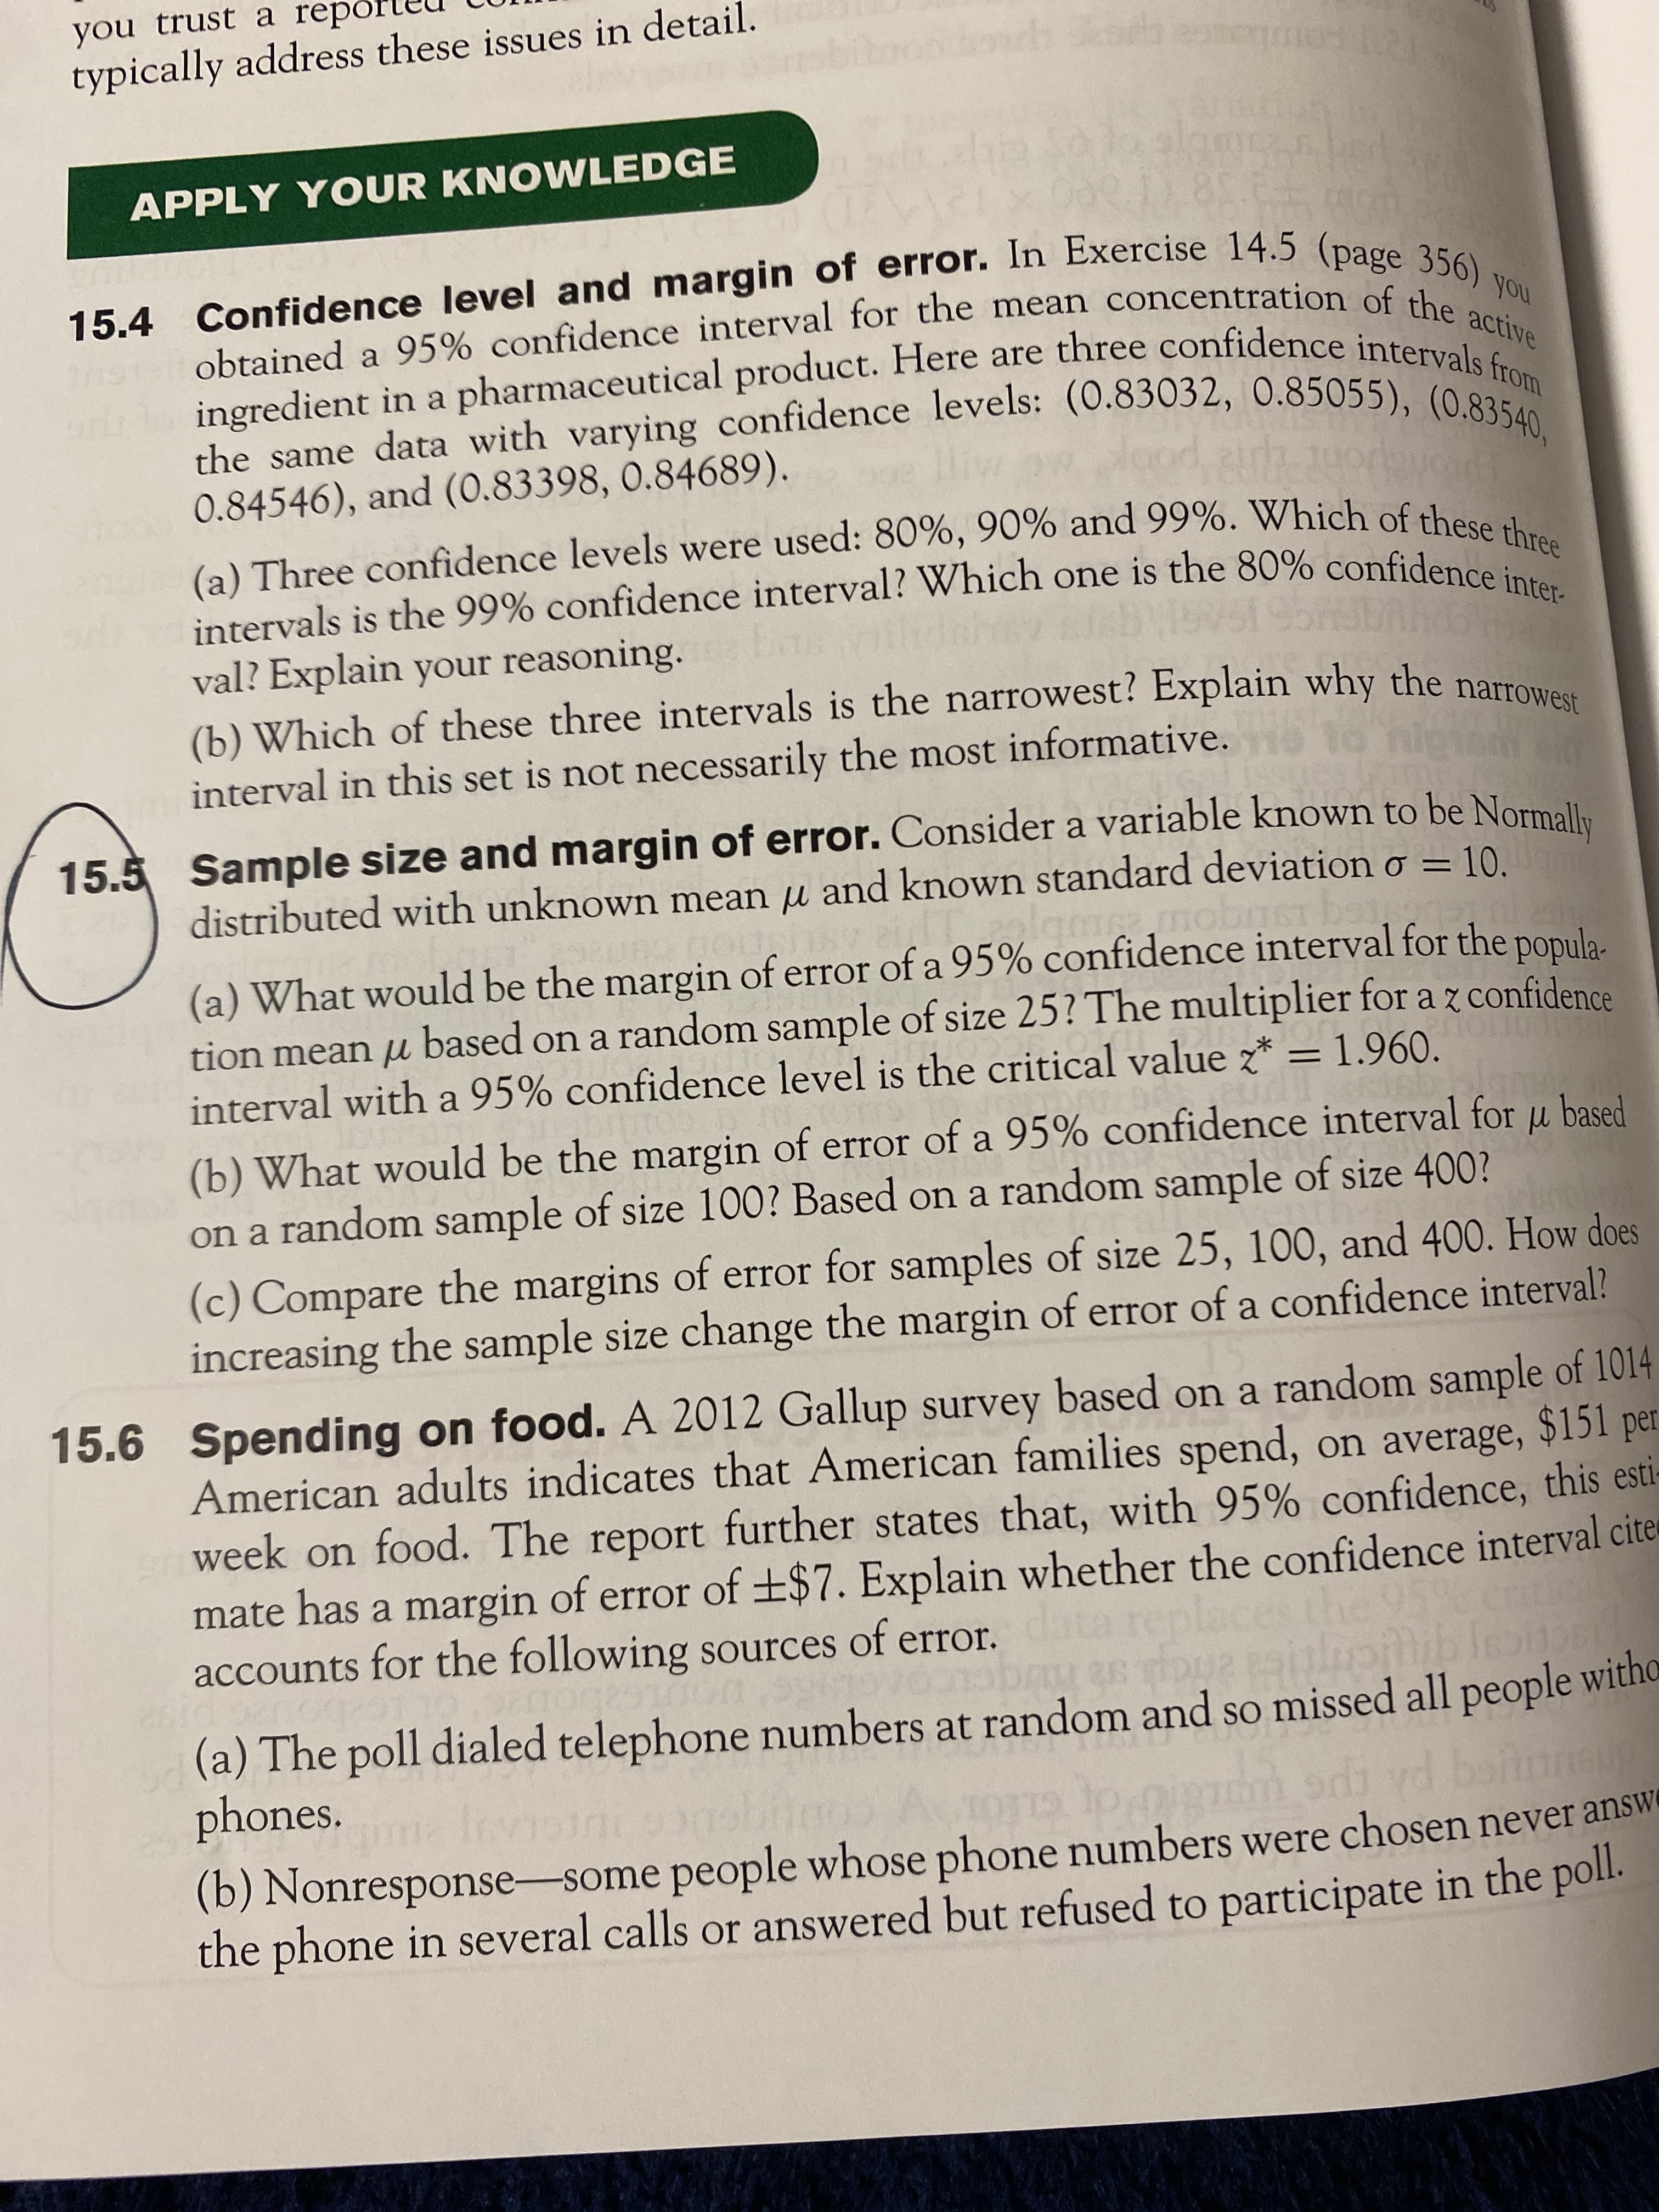 obtained a interval for the of the
15.4 and of In 14.5 (page 356) ,
15.5 of a to be Normally
(a) Three 90% and of these three
intervals is the 99% one is the inter
you trust a repo
typically address these issues in detail.
APPLY YOUR KNOWLEDGE
obtained a 95% confidence interval for the mean concentration of s) you
ingredient in a pharmaceutical product. Here are three confidence inte active
0.84546), and (0.83398, 0.84689).
(a) Three confidence levels were used: 80%, 90% and 99%. Which of these al
intervals is the 99% confidence interval? Which one is the 80% confidence: e
val? Explain your reasoning.
(b) Which of these three intervals is the narrowest? Explain why the narrow
interval in this set is not necessarily the most informative.
15.5 Sample size and margin of error. Consider a variable known to be Normall,
distributed with unknown mean u and known standard deviation o
= 10.
(a) What would be the margin of error of a 95% confidence interval for the ponula
tion mean µ based on a random sample of size 25? The multiplier for a z confidence
interval with a 95% confidence level is the critical value z* = 1.960.
(b) What would be the margin of error of a 95% confidence interval for u based
on a random sample of size 100? Based on a random sample of size 400?
(c) Compare the margins of error for samples of size 25, 100, and 400. How does
increasing the sample size change the margin of error of a confidence interval?
15.6 Spending on food. A 2012 Gallup survey based on a random sample of 1014
American adults indicates that American families spend, on average, $15l per
week on food. The report further states that, with 95% confidence, this esti-
mate has a margin of error of ±$7. Explain whether the confidence interval cite
accounts for the following sources of error.ta replaces t
(a) The poll dialed telephone numbers at random and so missed all people witho
phones.
ma fev
(b) Nonresponse-some people whose phone numbers were chosen never answe
the phone in several calls or answered but refused to participate in the poll.
GLIOT
